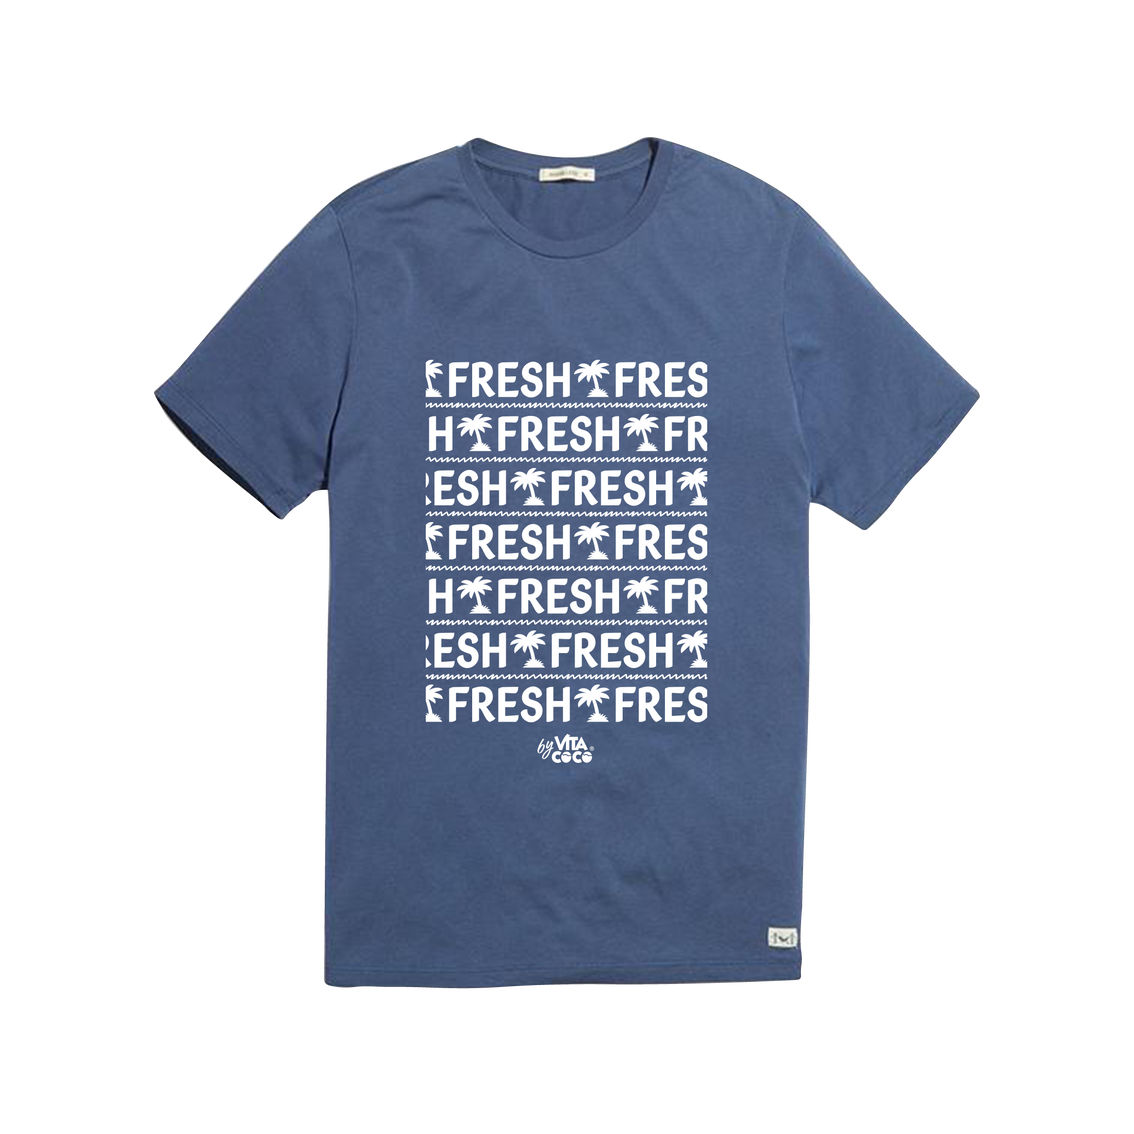 A blue Fresh Crewneck Tee shirt with the word "fresh" on it, perfect for lounging on the couch from Vita Coco.